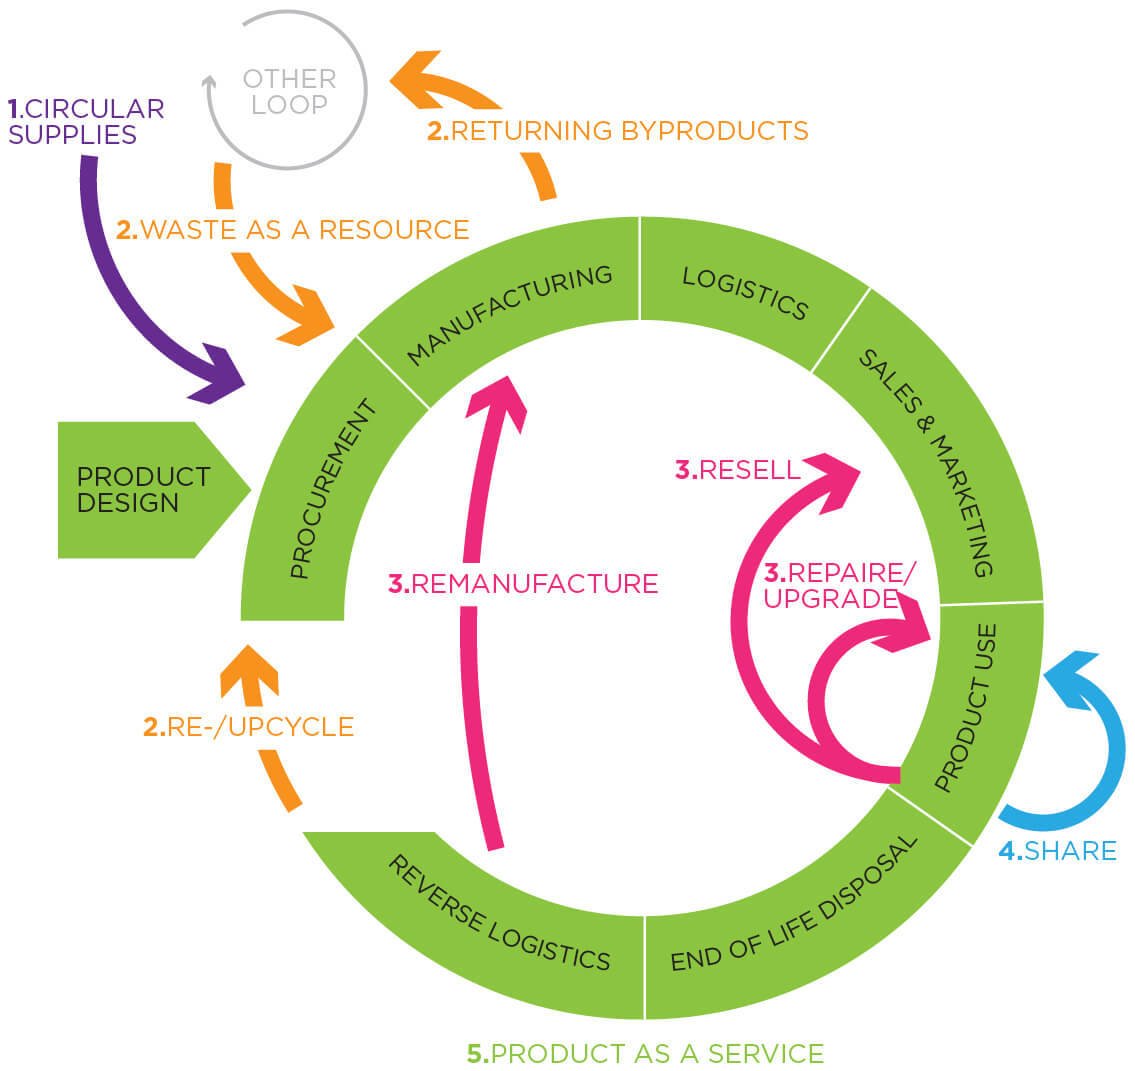 DesignRepublic a belgian brandiing and packaging design agency on how to contribute to the circular economy